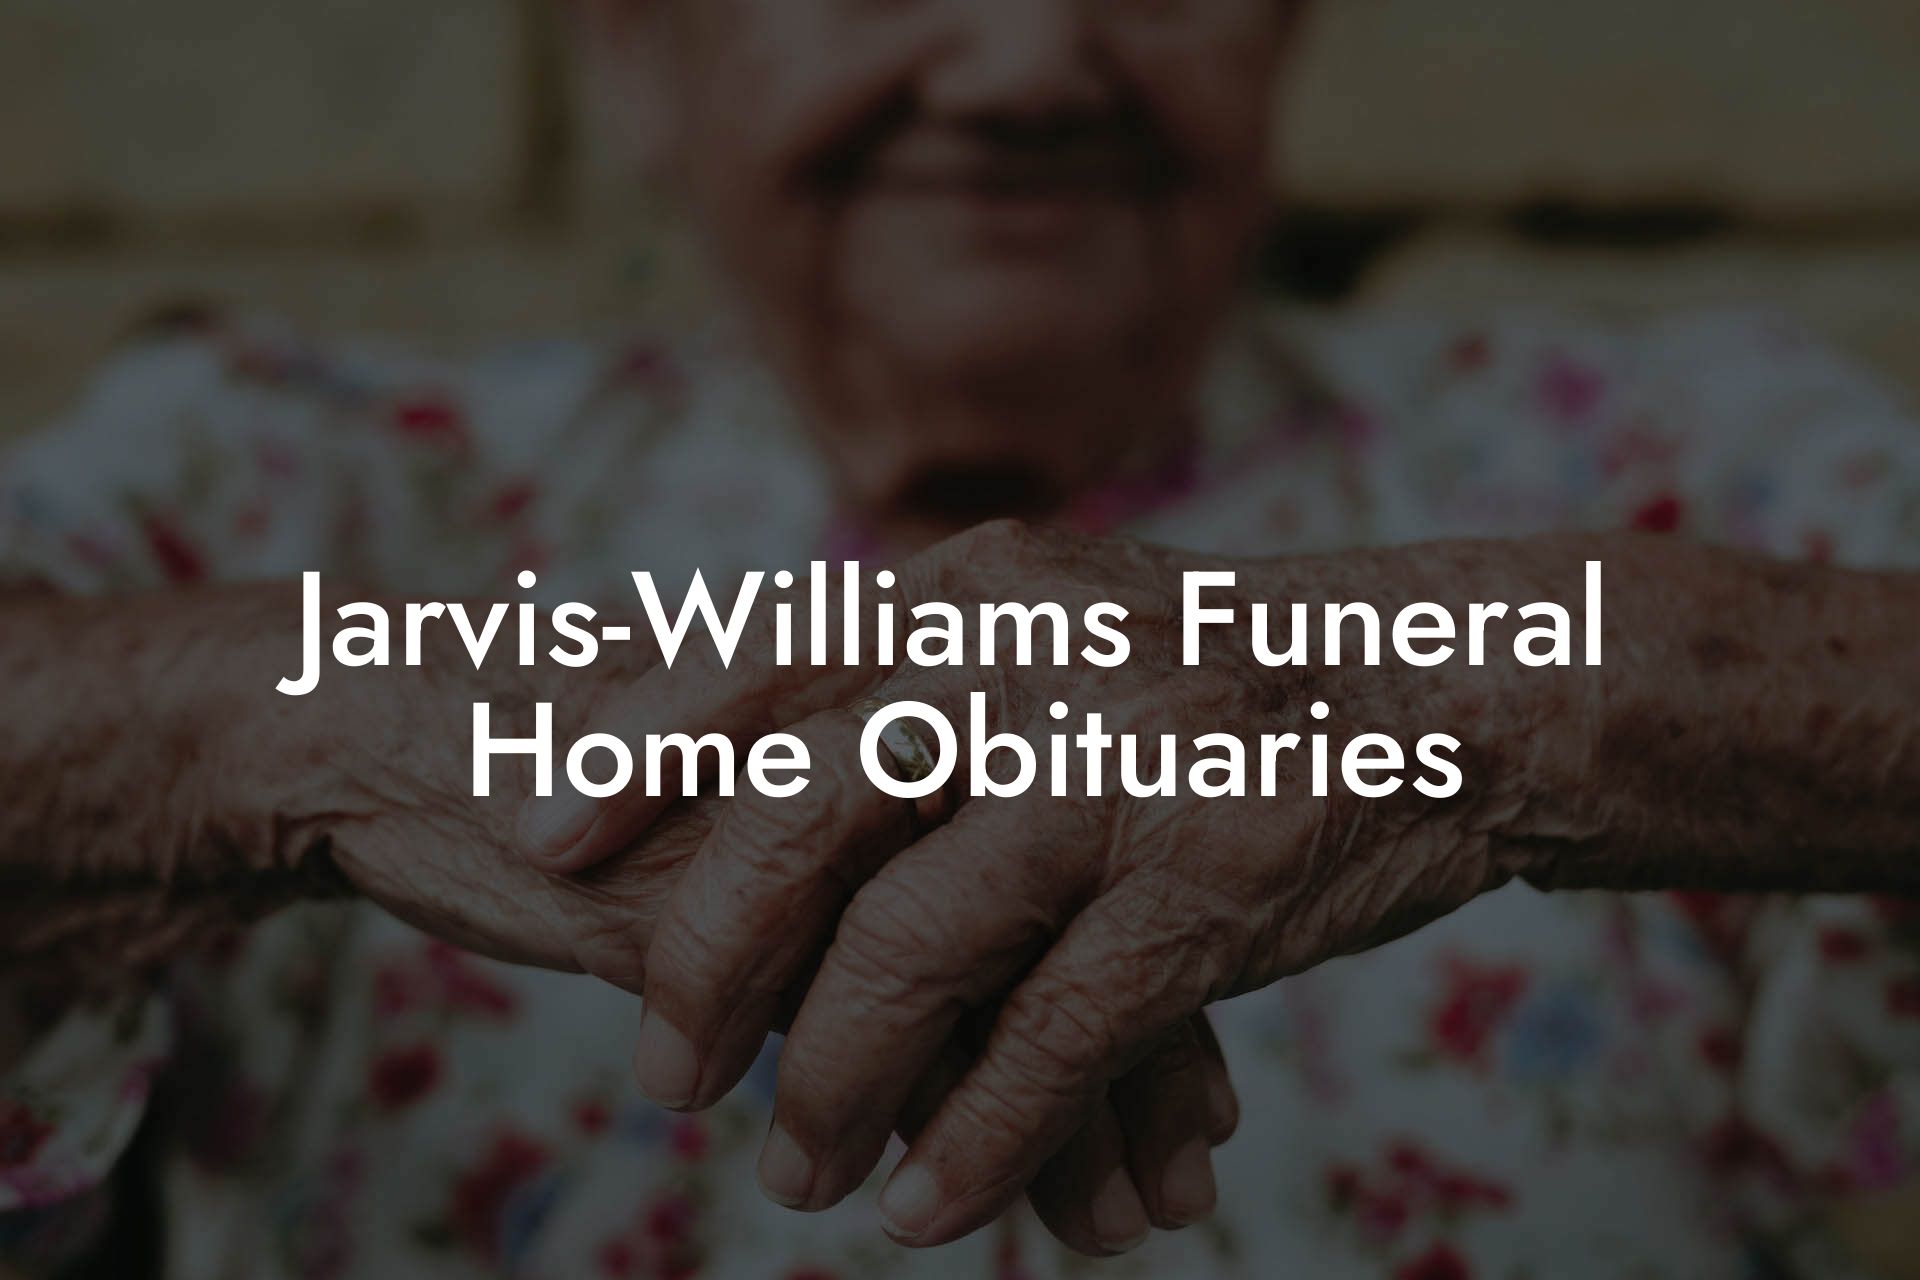 Jarvis-Williams Funeral Home Obituaries